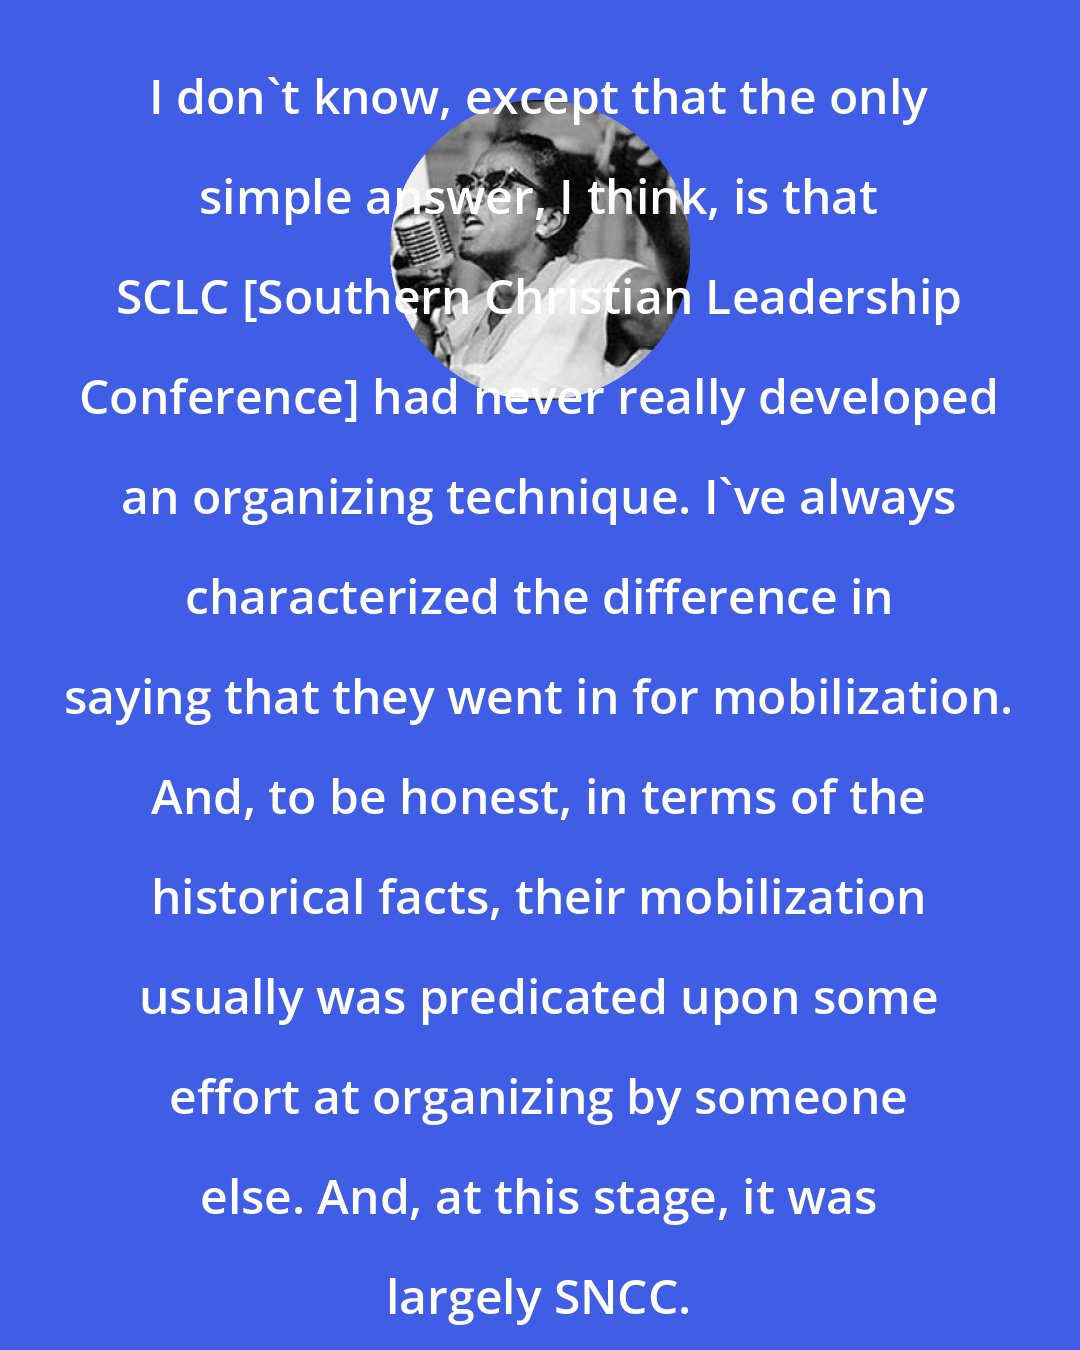 Ella Baker: I don't know, except that the only simple answer, I think, is that SCLC [Southern Christian Leadership Conference] had never really developed an organizing technique. I've always characterized the difference in saying that they went in for mobilization. And, to be honest, in terms of the historical facts, their mobilization usually was predicated upon some effort at organizing by someone else. And, at this stage, it was largely SNCC.